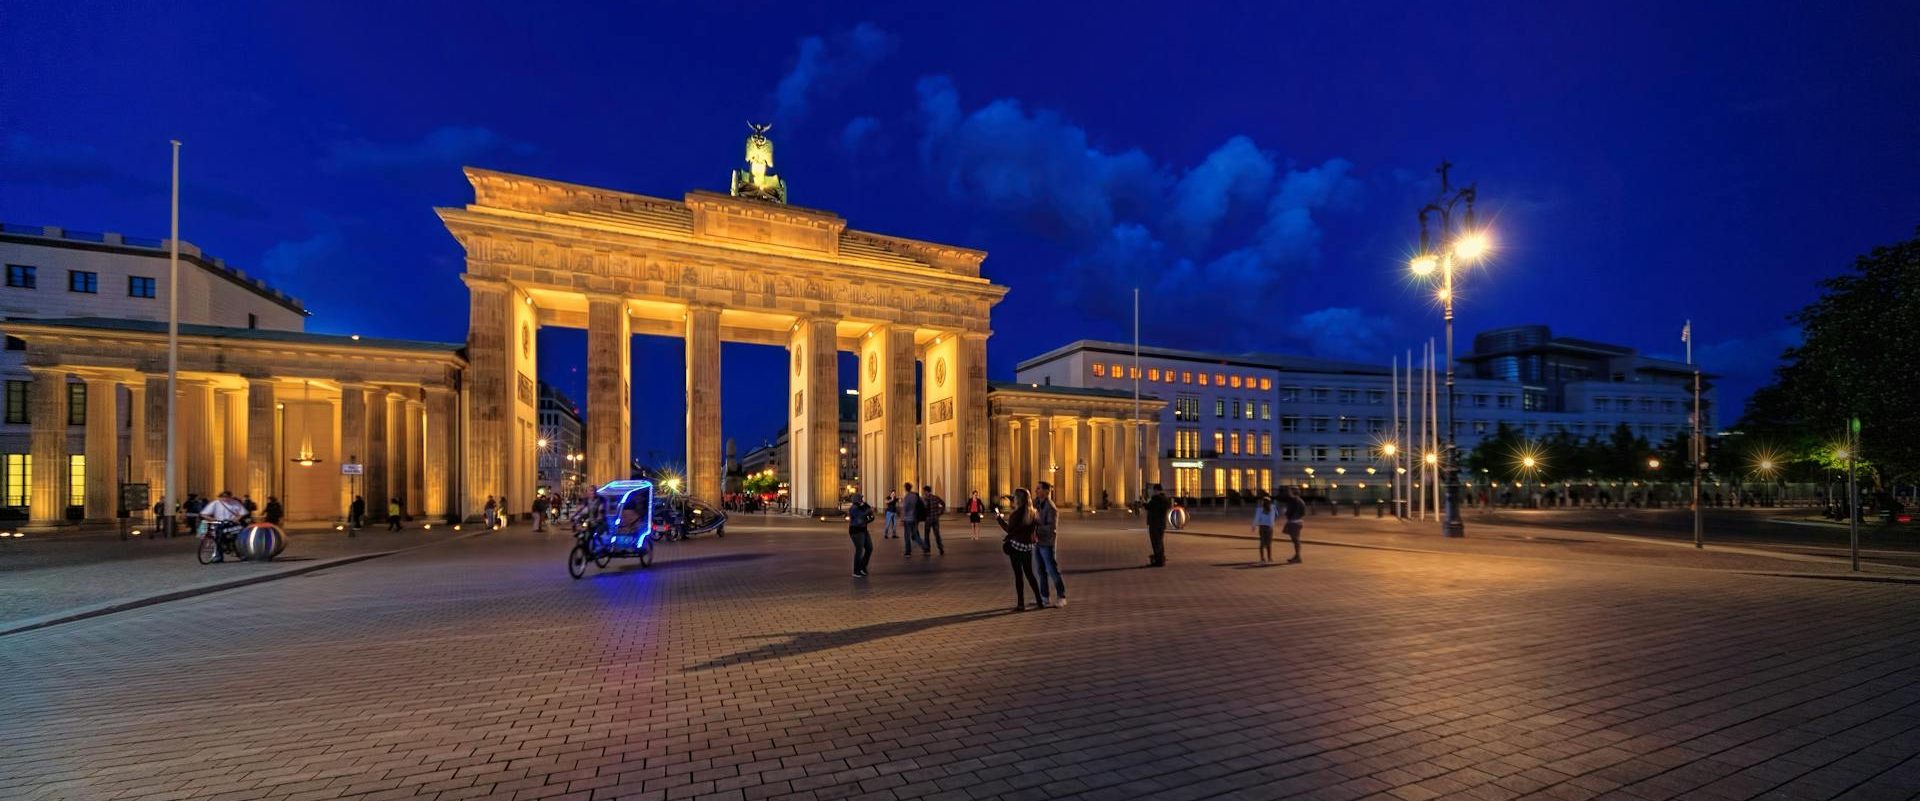 The Average Rent in Berlin: An Expat Guide